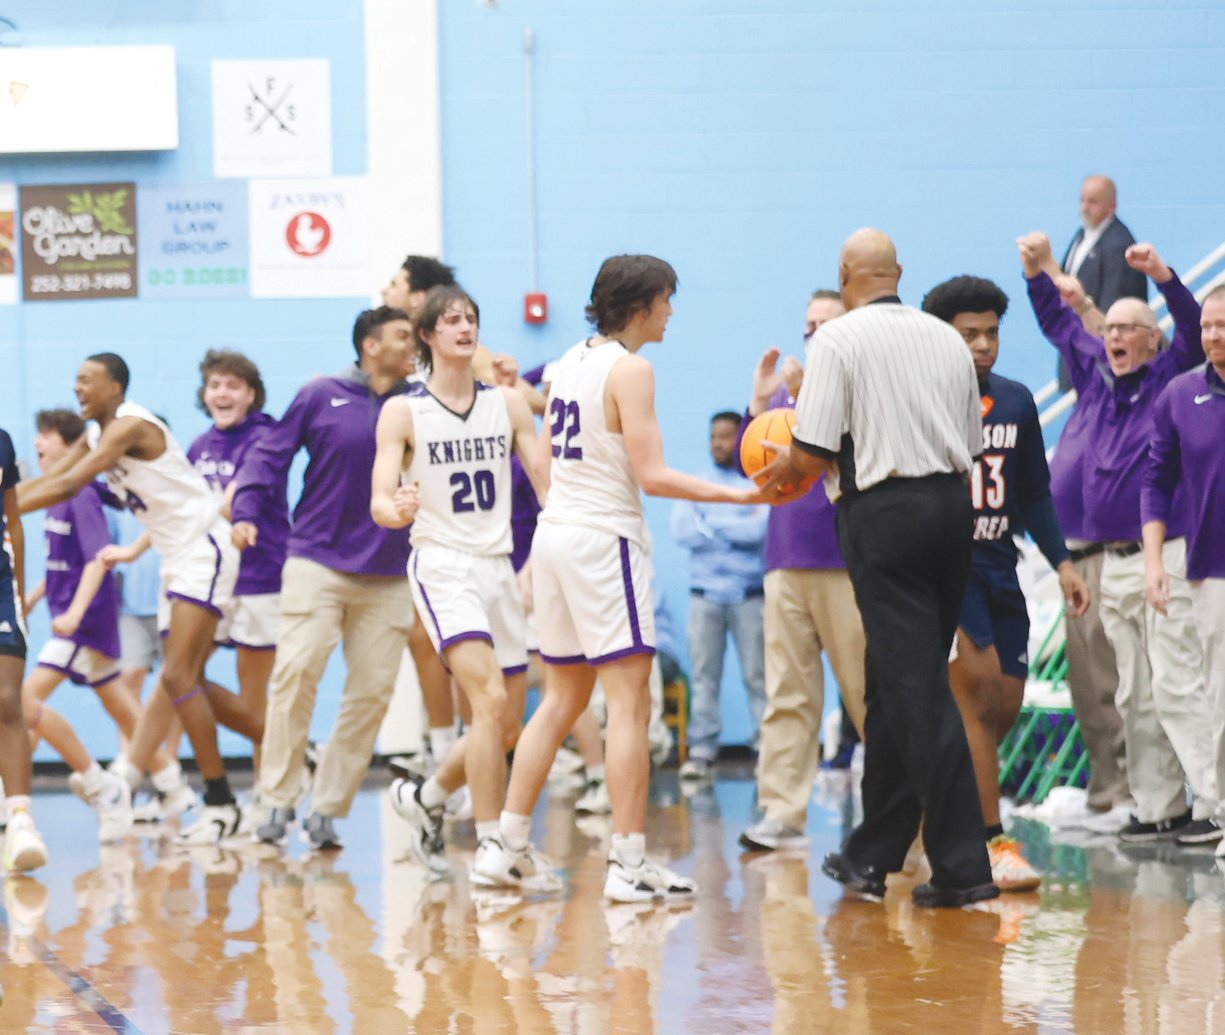 The Chatham Charter men's basketball team, including junior Adam Harvey (20) and Beau Harvey (22), celebrates as the final buzzer sounds at the end of the Knights' 59-42 win over the Wilson Prep Tigers in the NCHSAA 3A East Regional Final last Saturday in Greenville. With the win, Chatham Charter advances to its first state championship game.